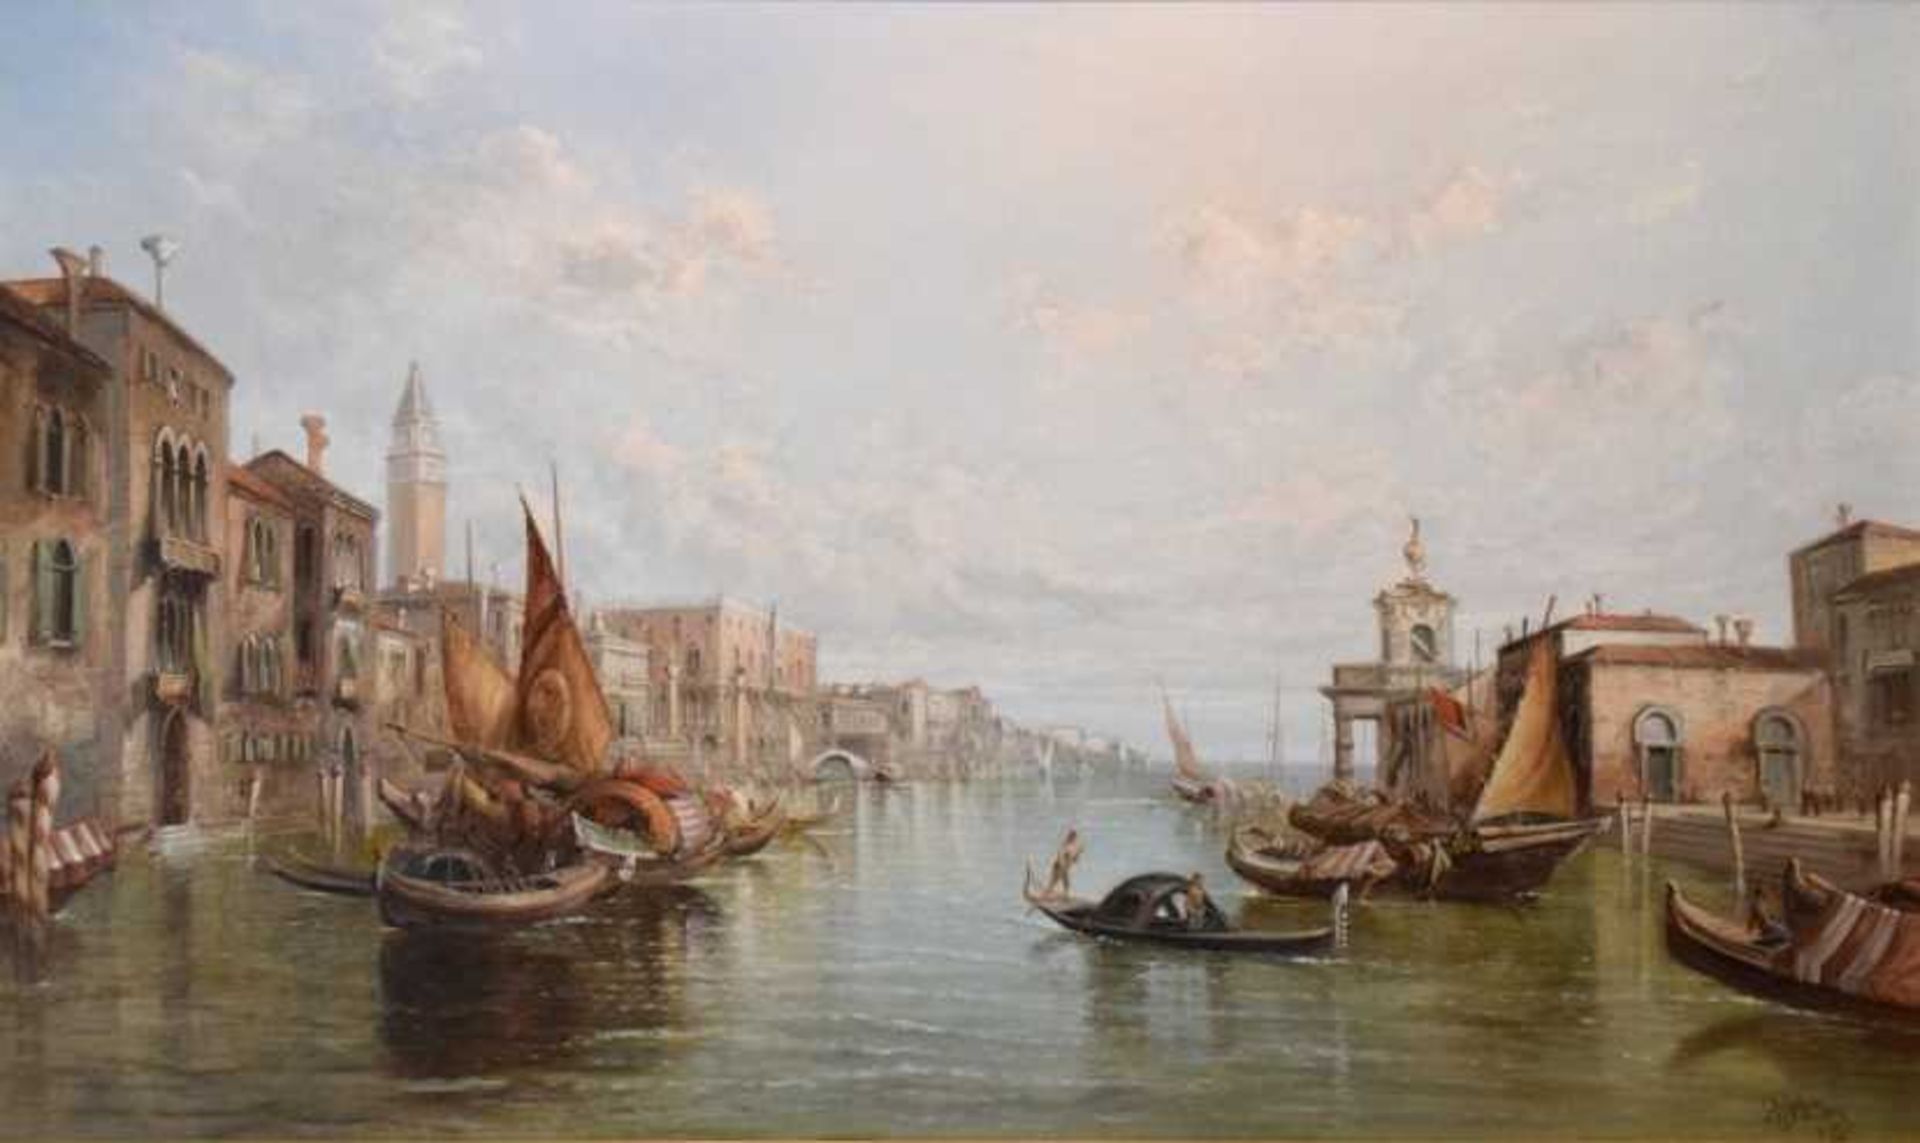 Alfred Pollentine (1836-1890) - Oil on canvas - The Grand Canal, Venice